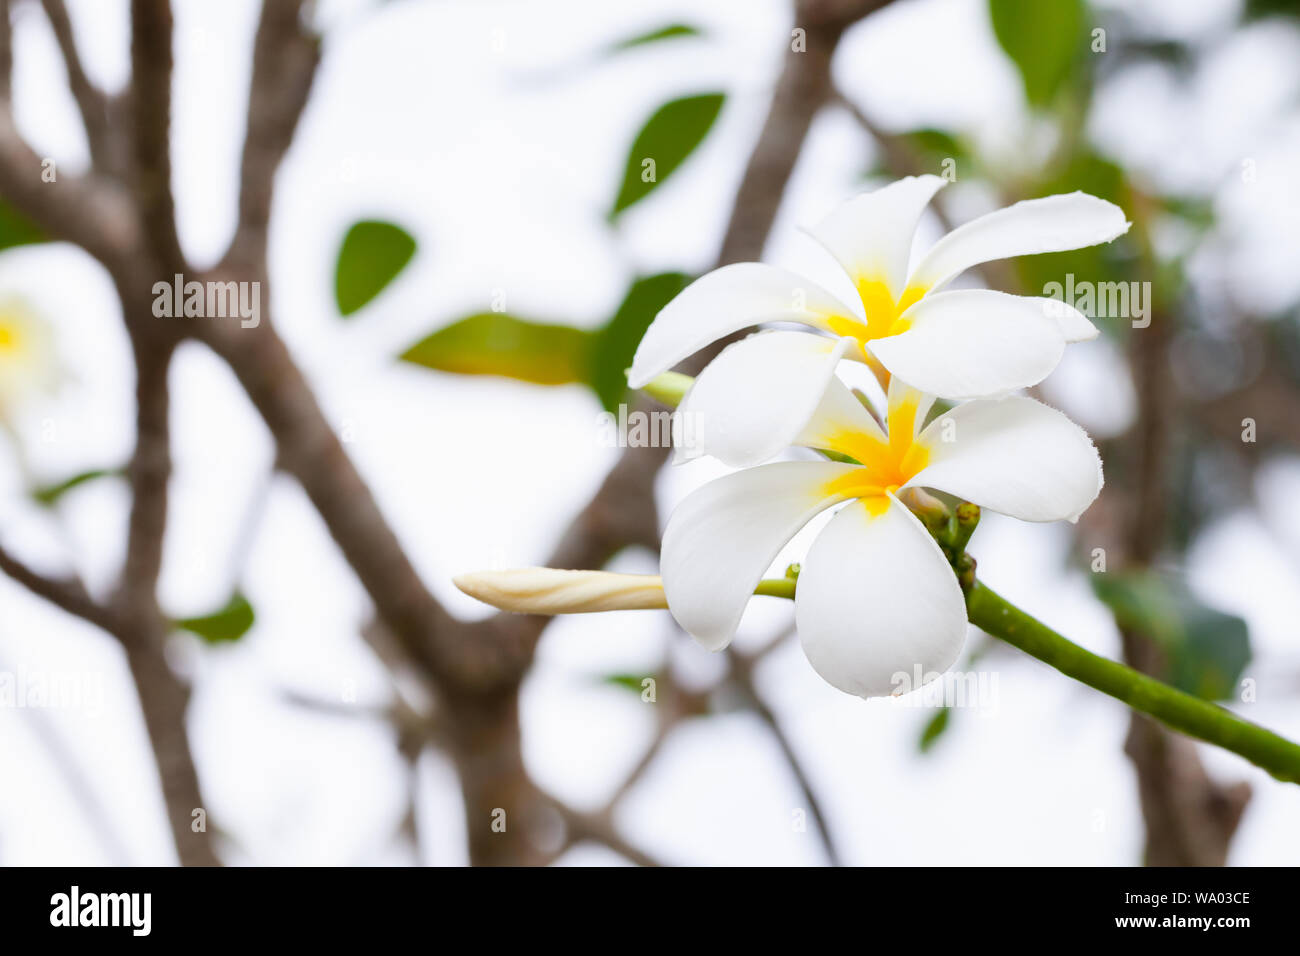 White tropical flowers with dew on it. Plumeria is a genus of flowering plants in the dogbane family, Apocynaceae. Close-up background photo with sele Stock Photo